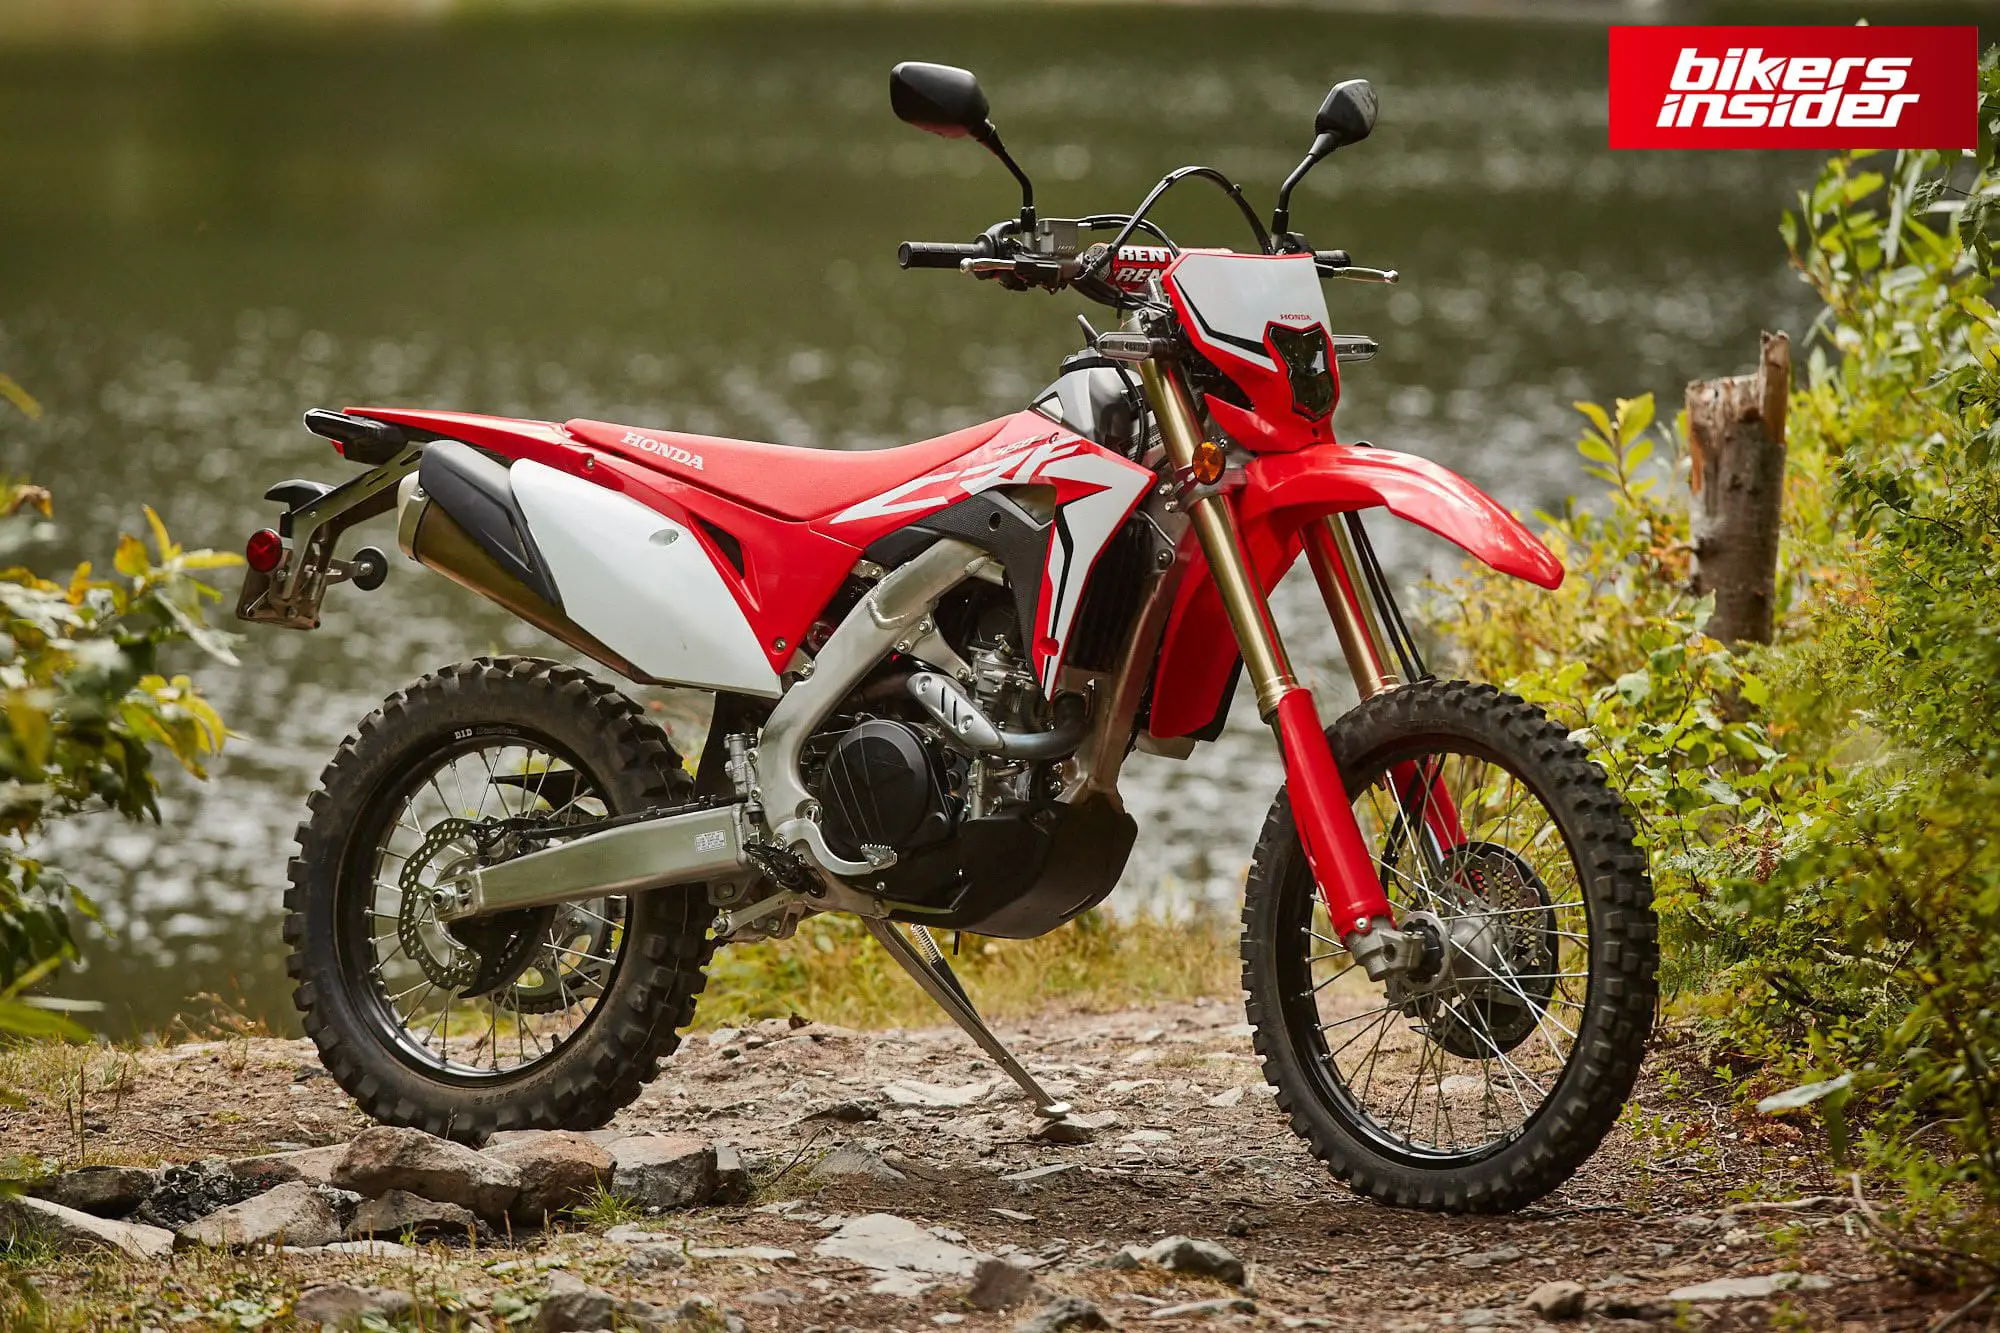 Honda To Release New Performance Kit For The CRF450L! - Bikers Insider